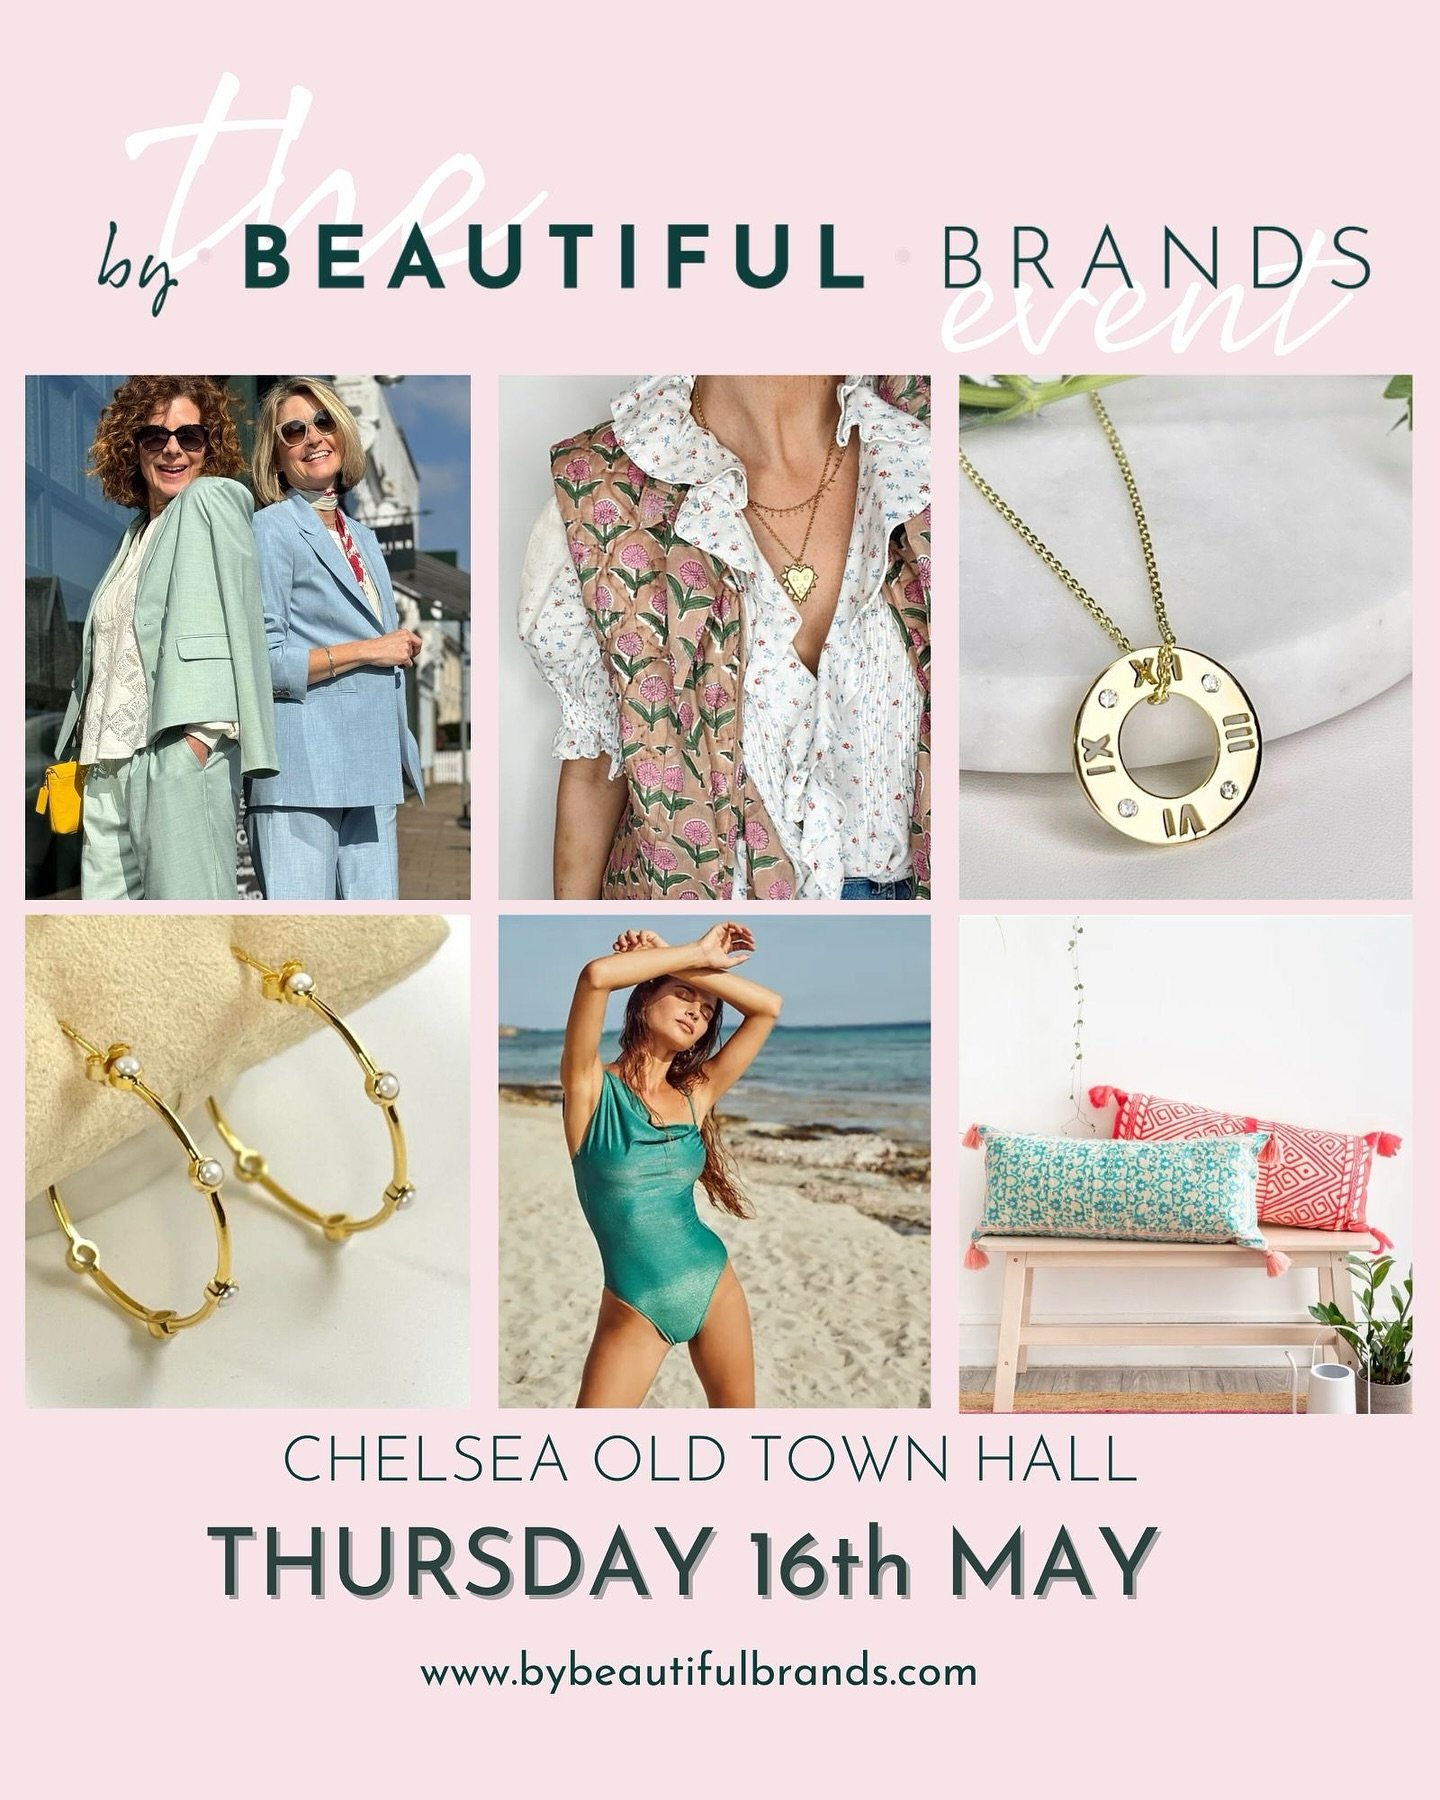 We are coming for you!  60 beautiful brands under one roof!  Don&rsquo;t miss it!  It&rsquo;s going to be AMAZING!!!
📍Thursday 16th May
📍Chelsea Old Town Hall
📍10am - 7pm
📍60 beautiful brands 
📍FREE ENTRY 
#shoppingevent #shopindependent #suppor